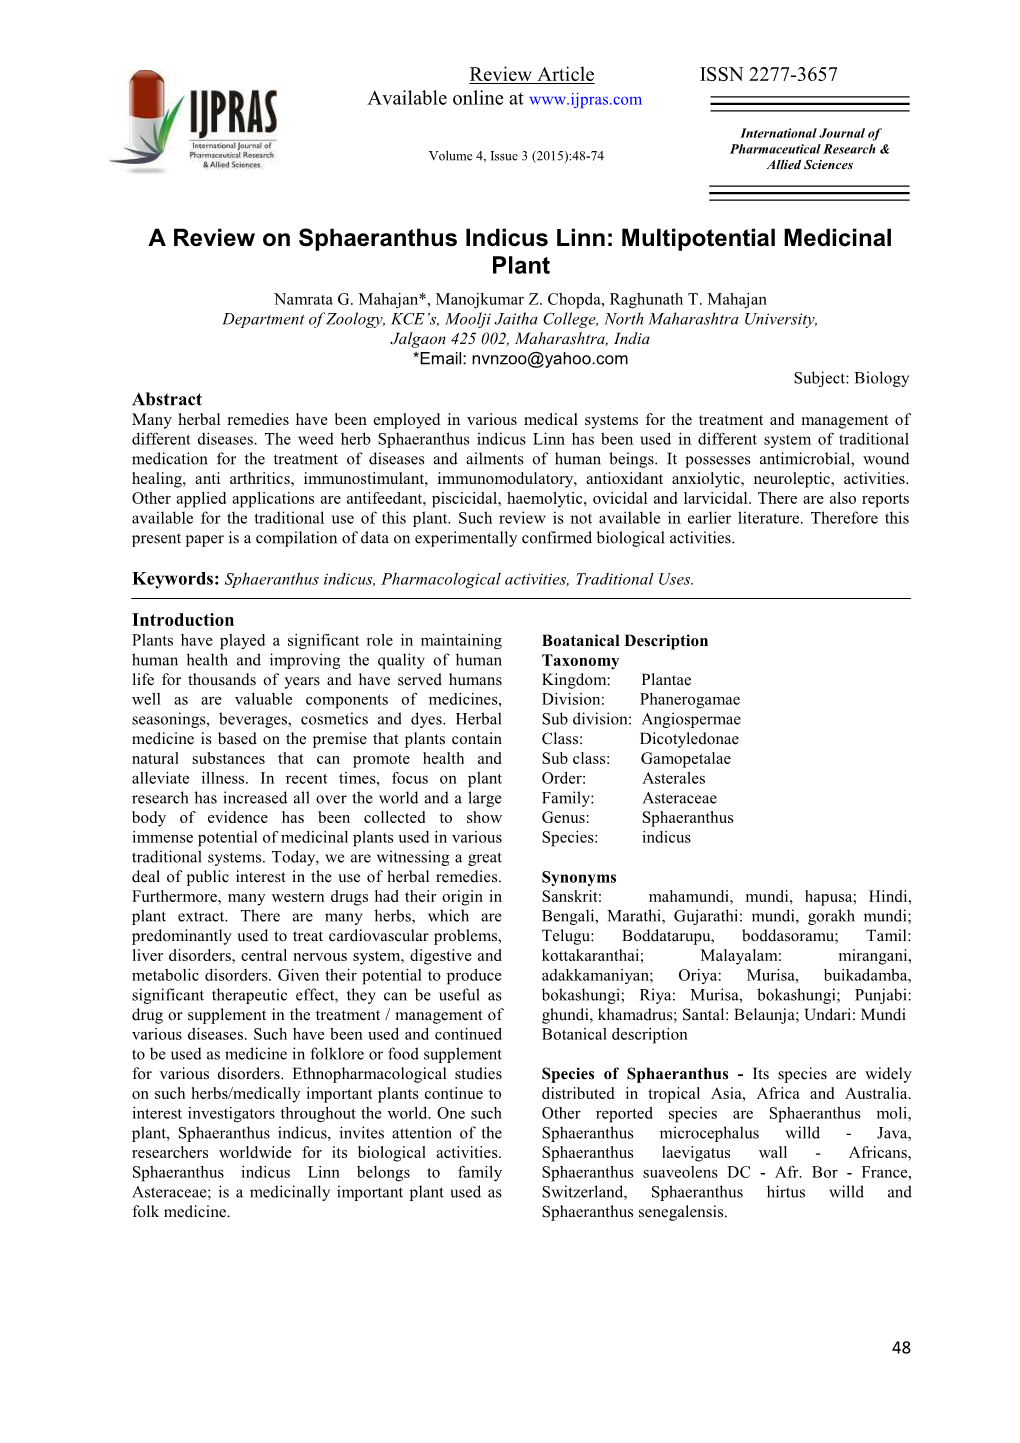 A Review on Sphaeranthus Indicus Linn: Multipotential Medicinal Plant Namrata G